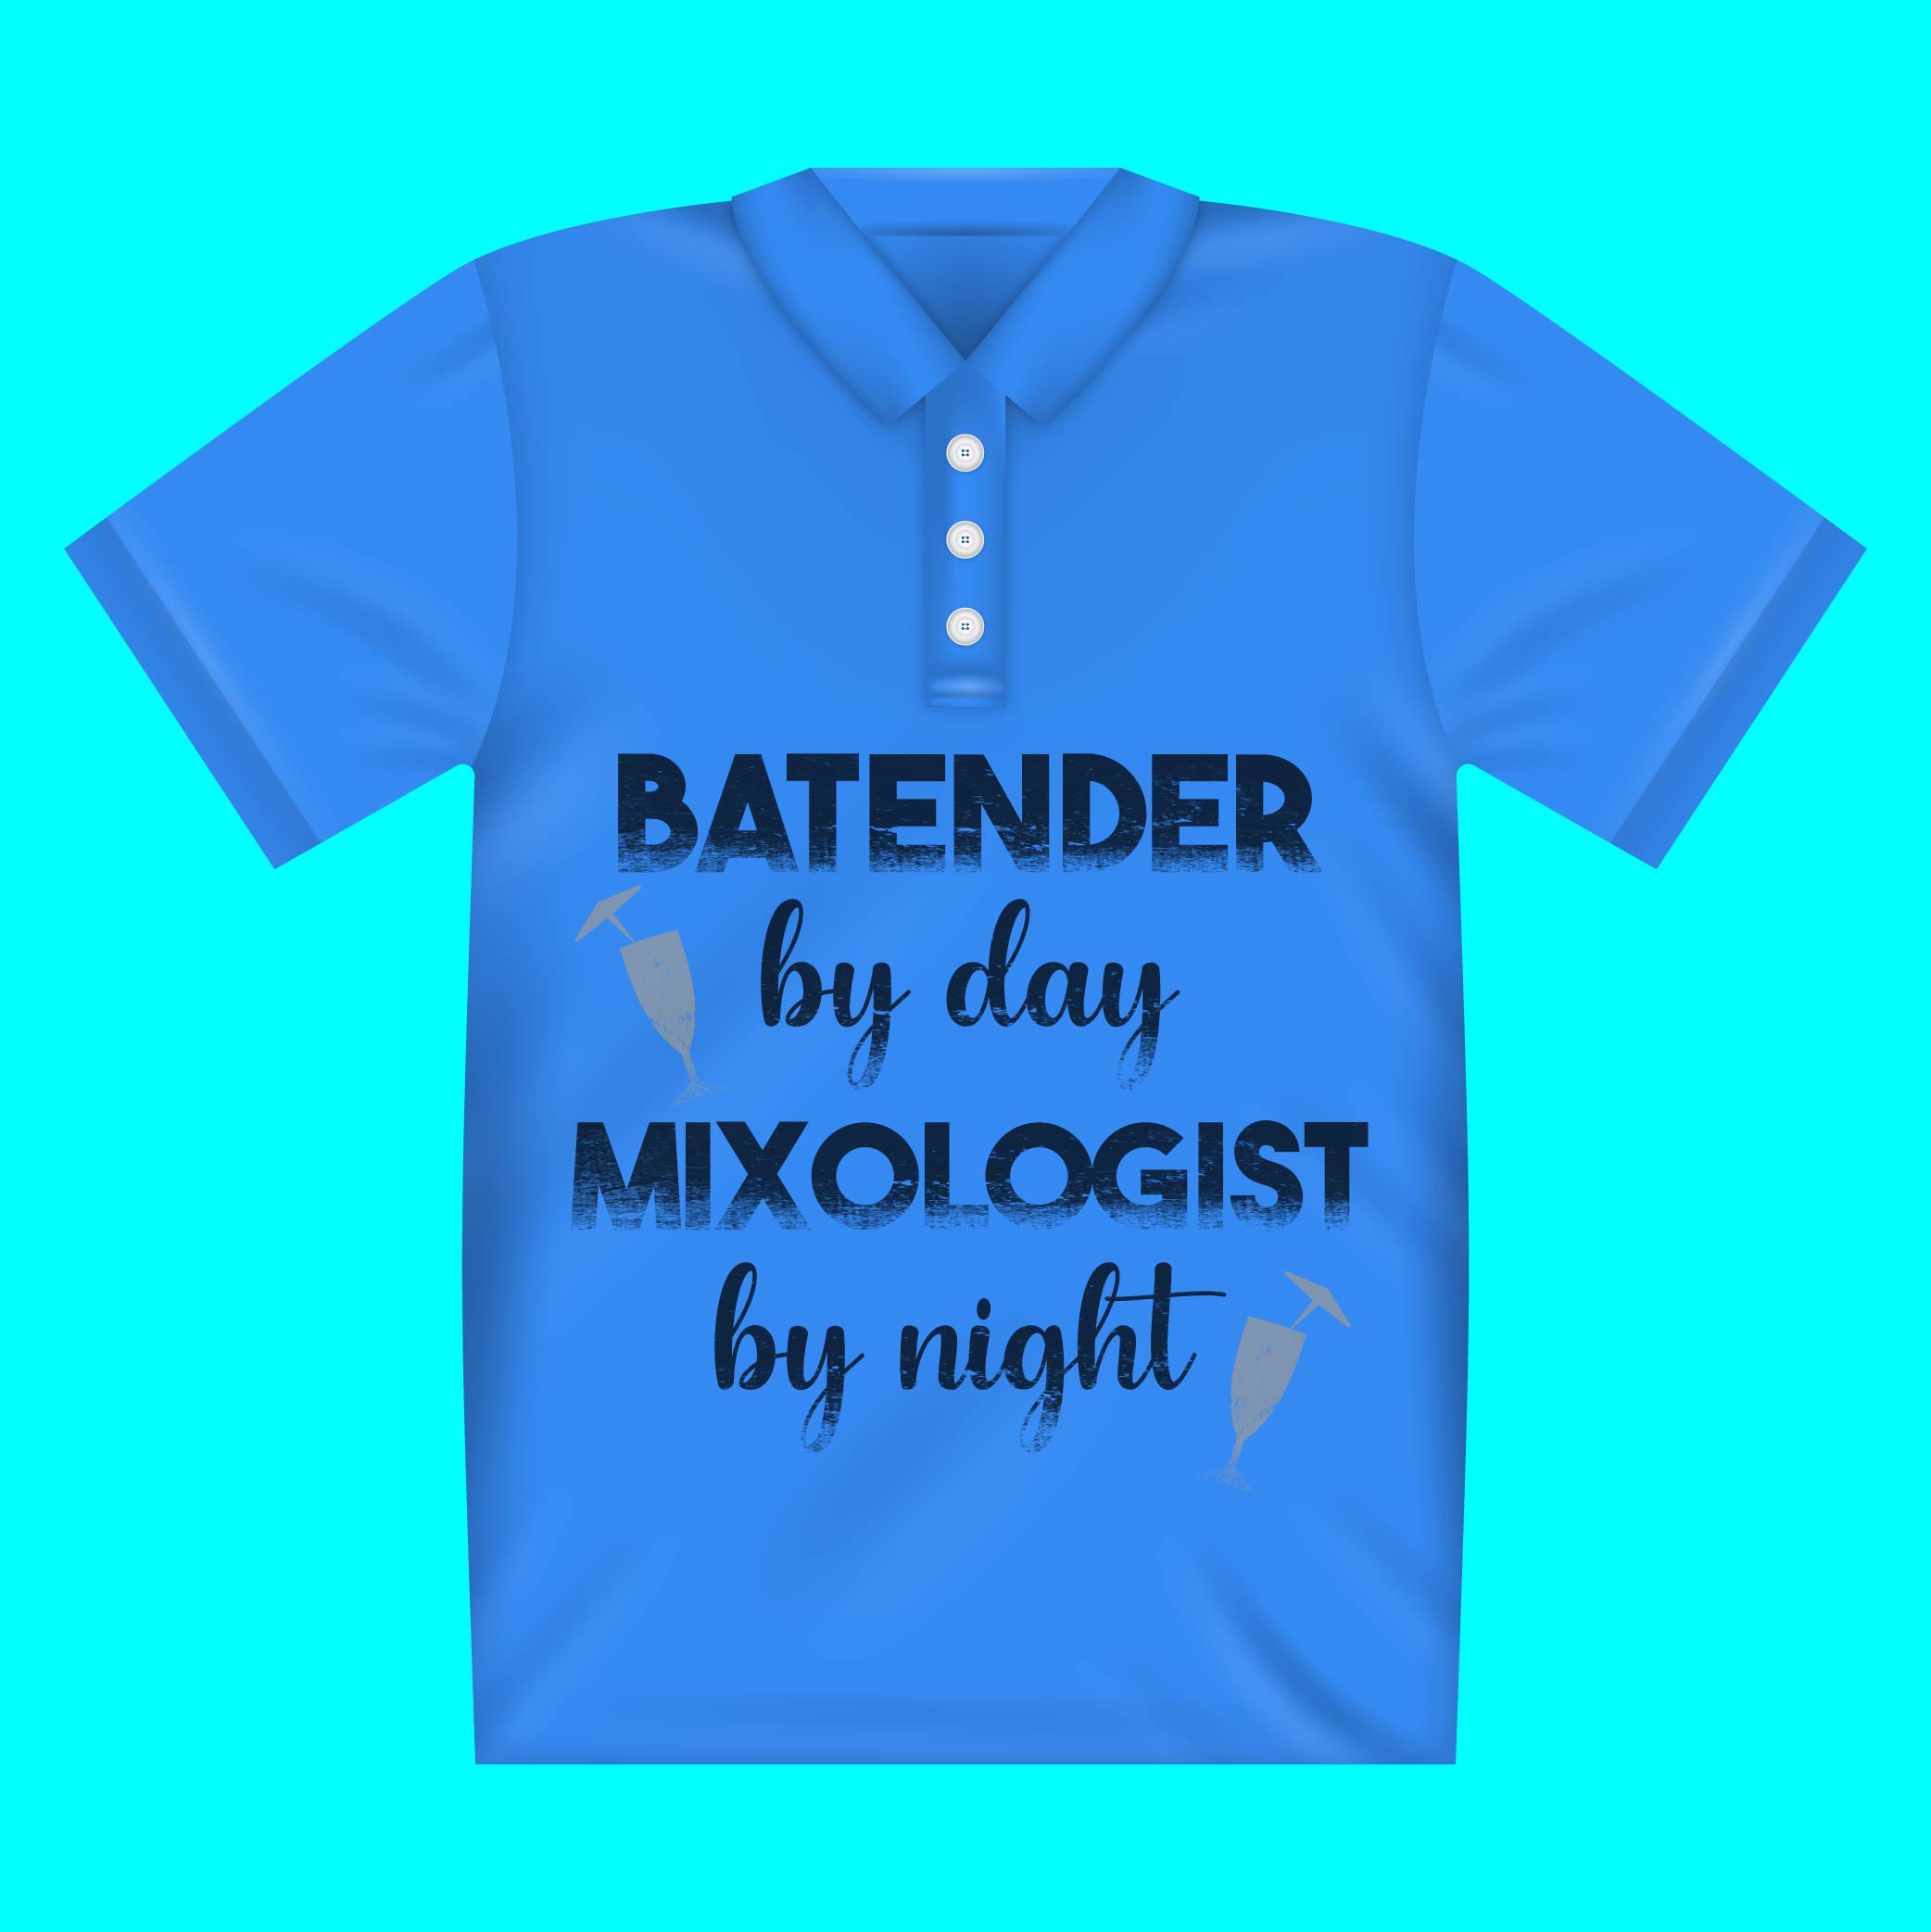 Blue polo shirt that says bartender by day mixologist by night.